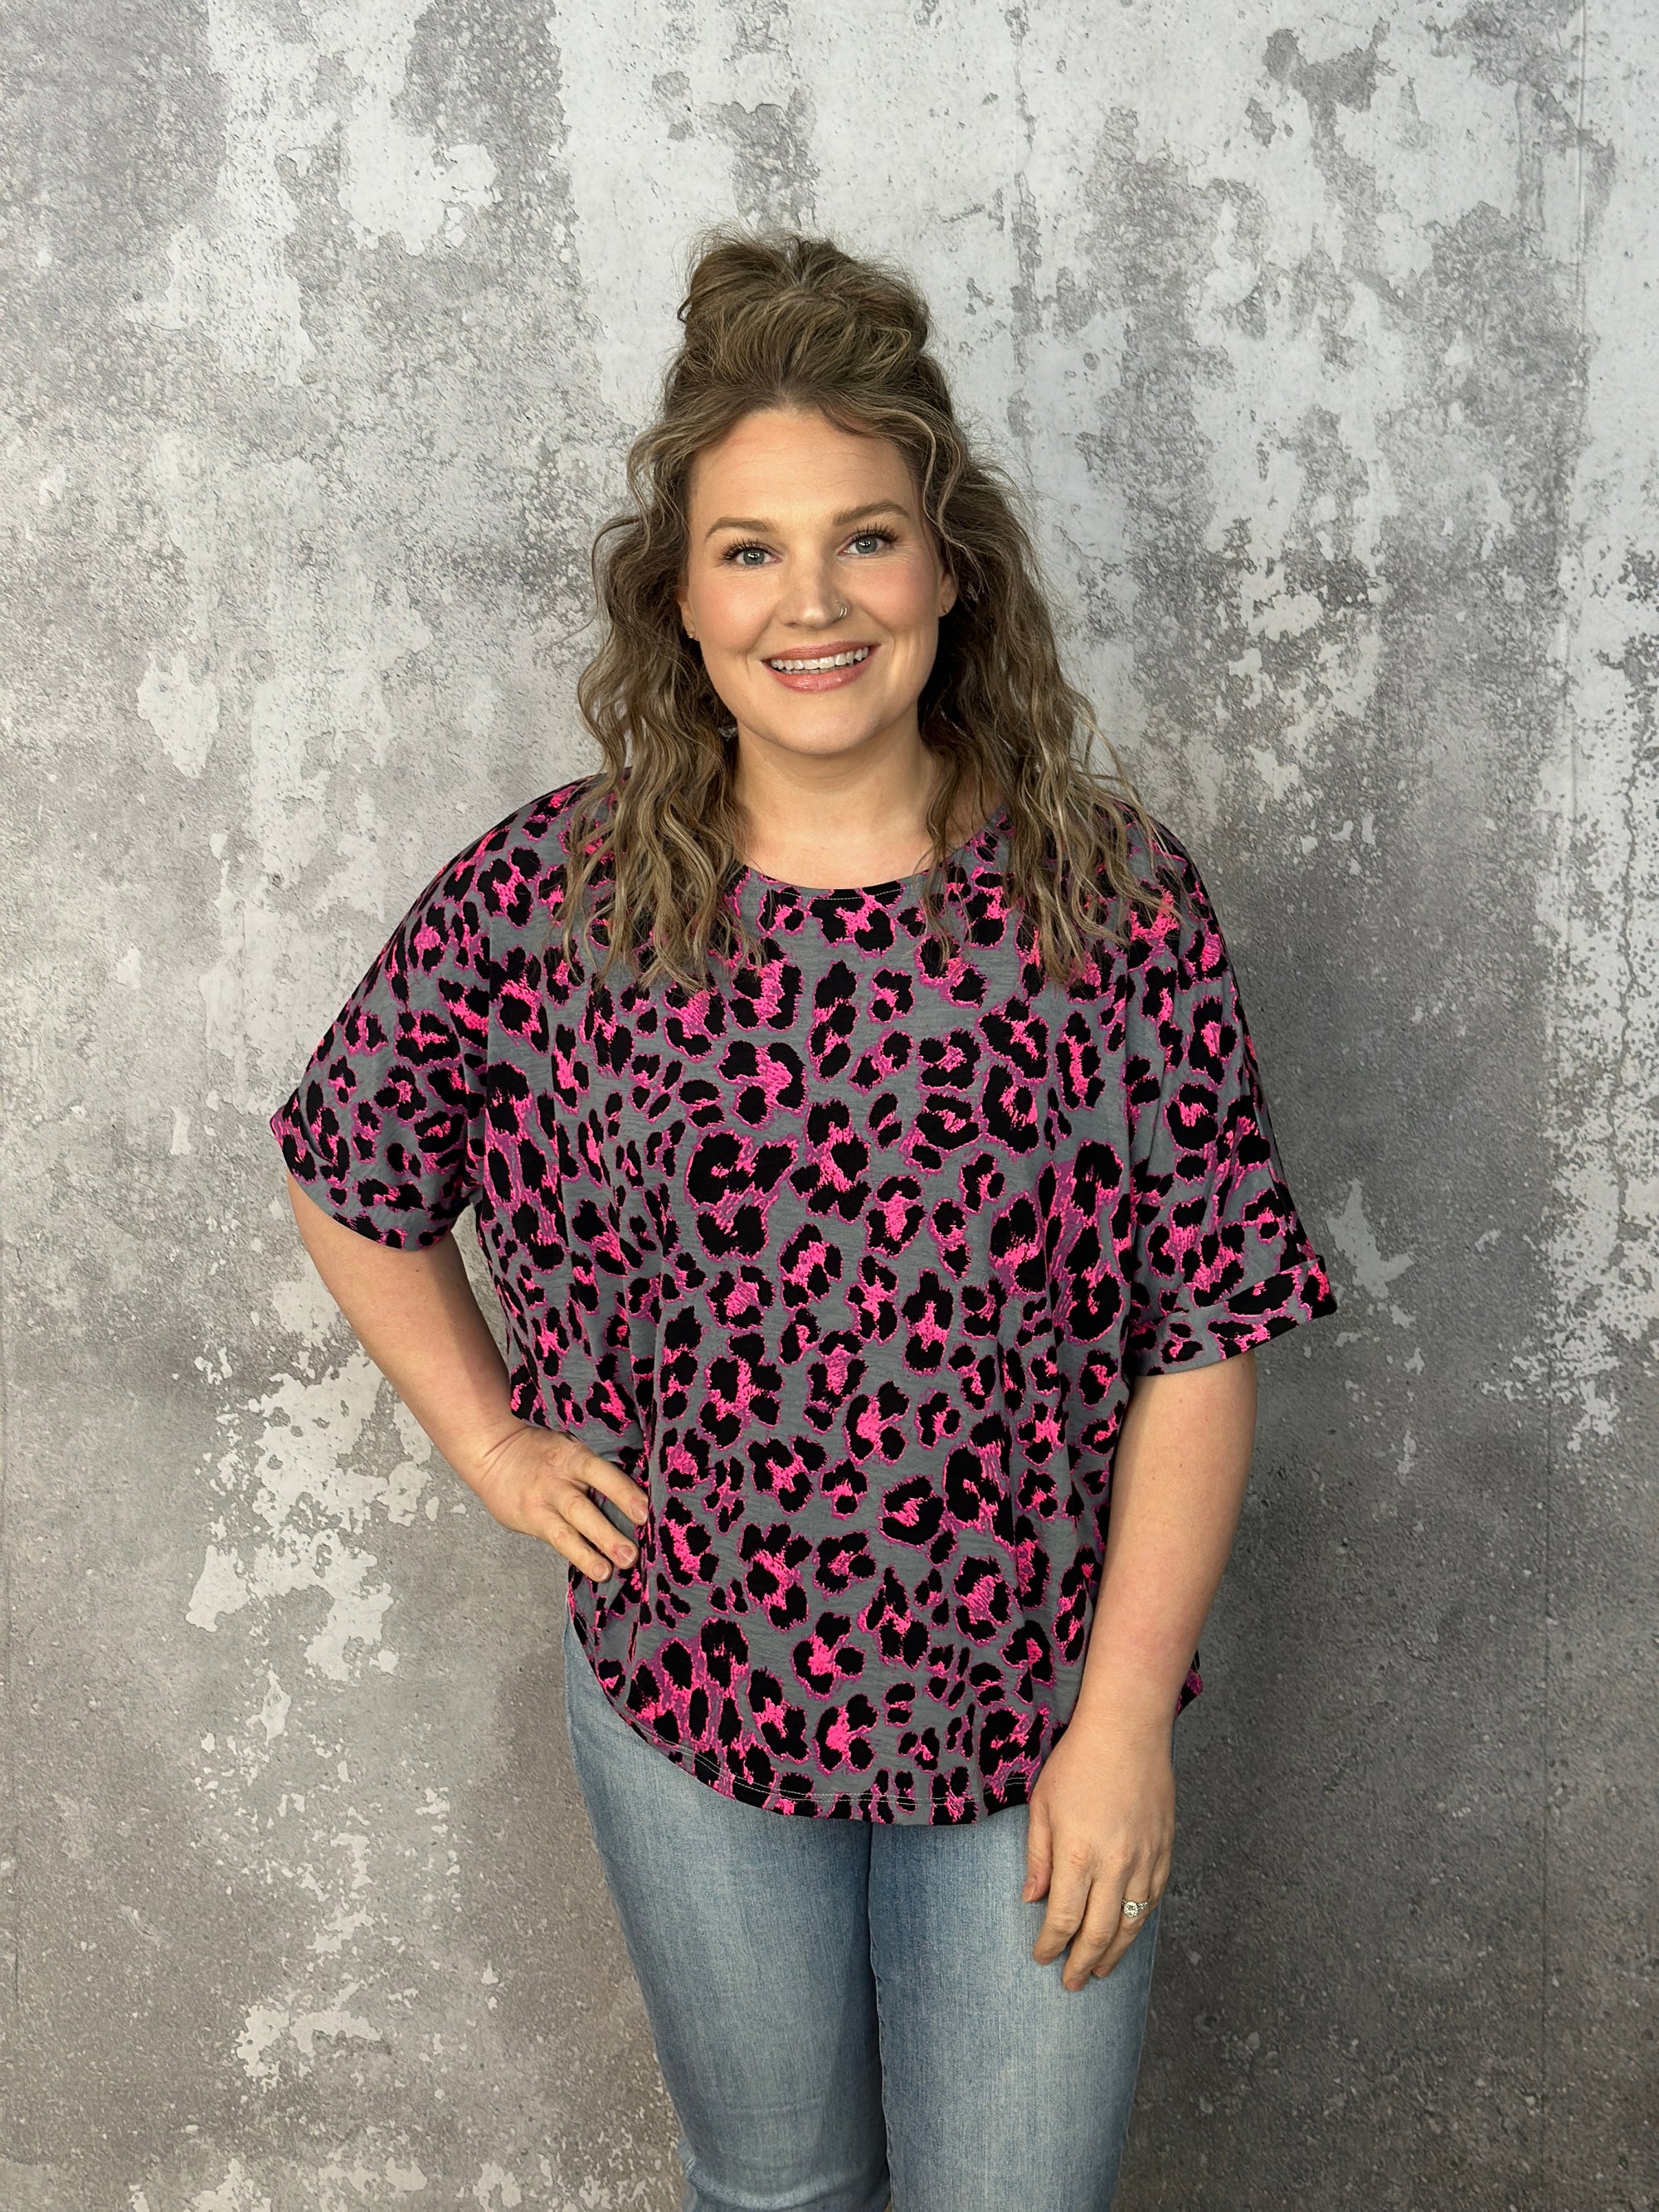 Neon Pink/Grey Leopard Short Sleeve Wrinkle Free Top (Small - 3X)